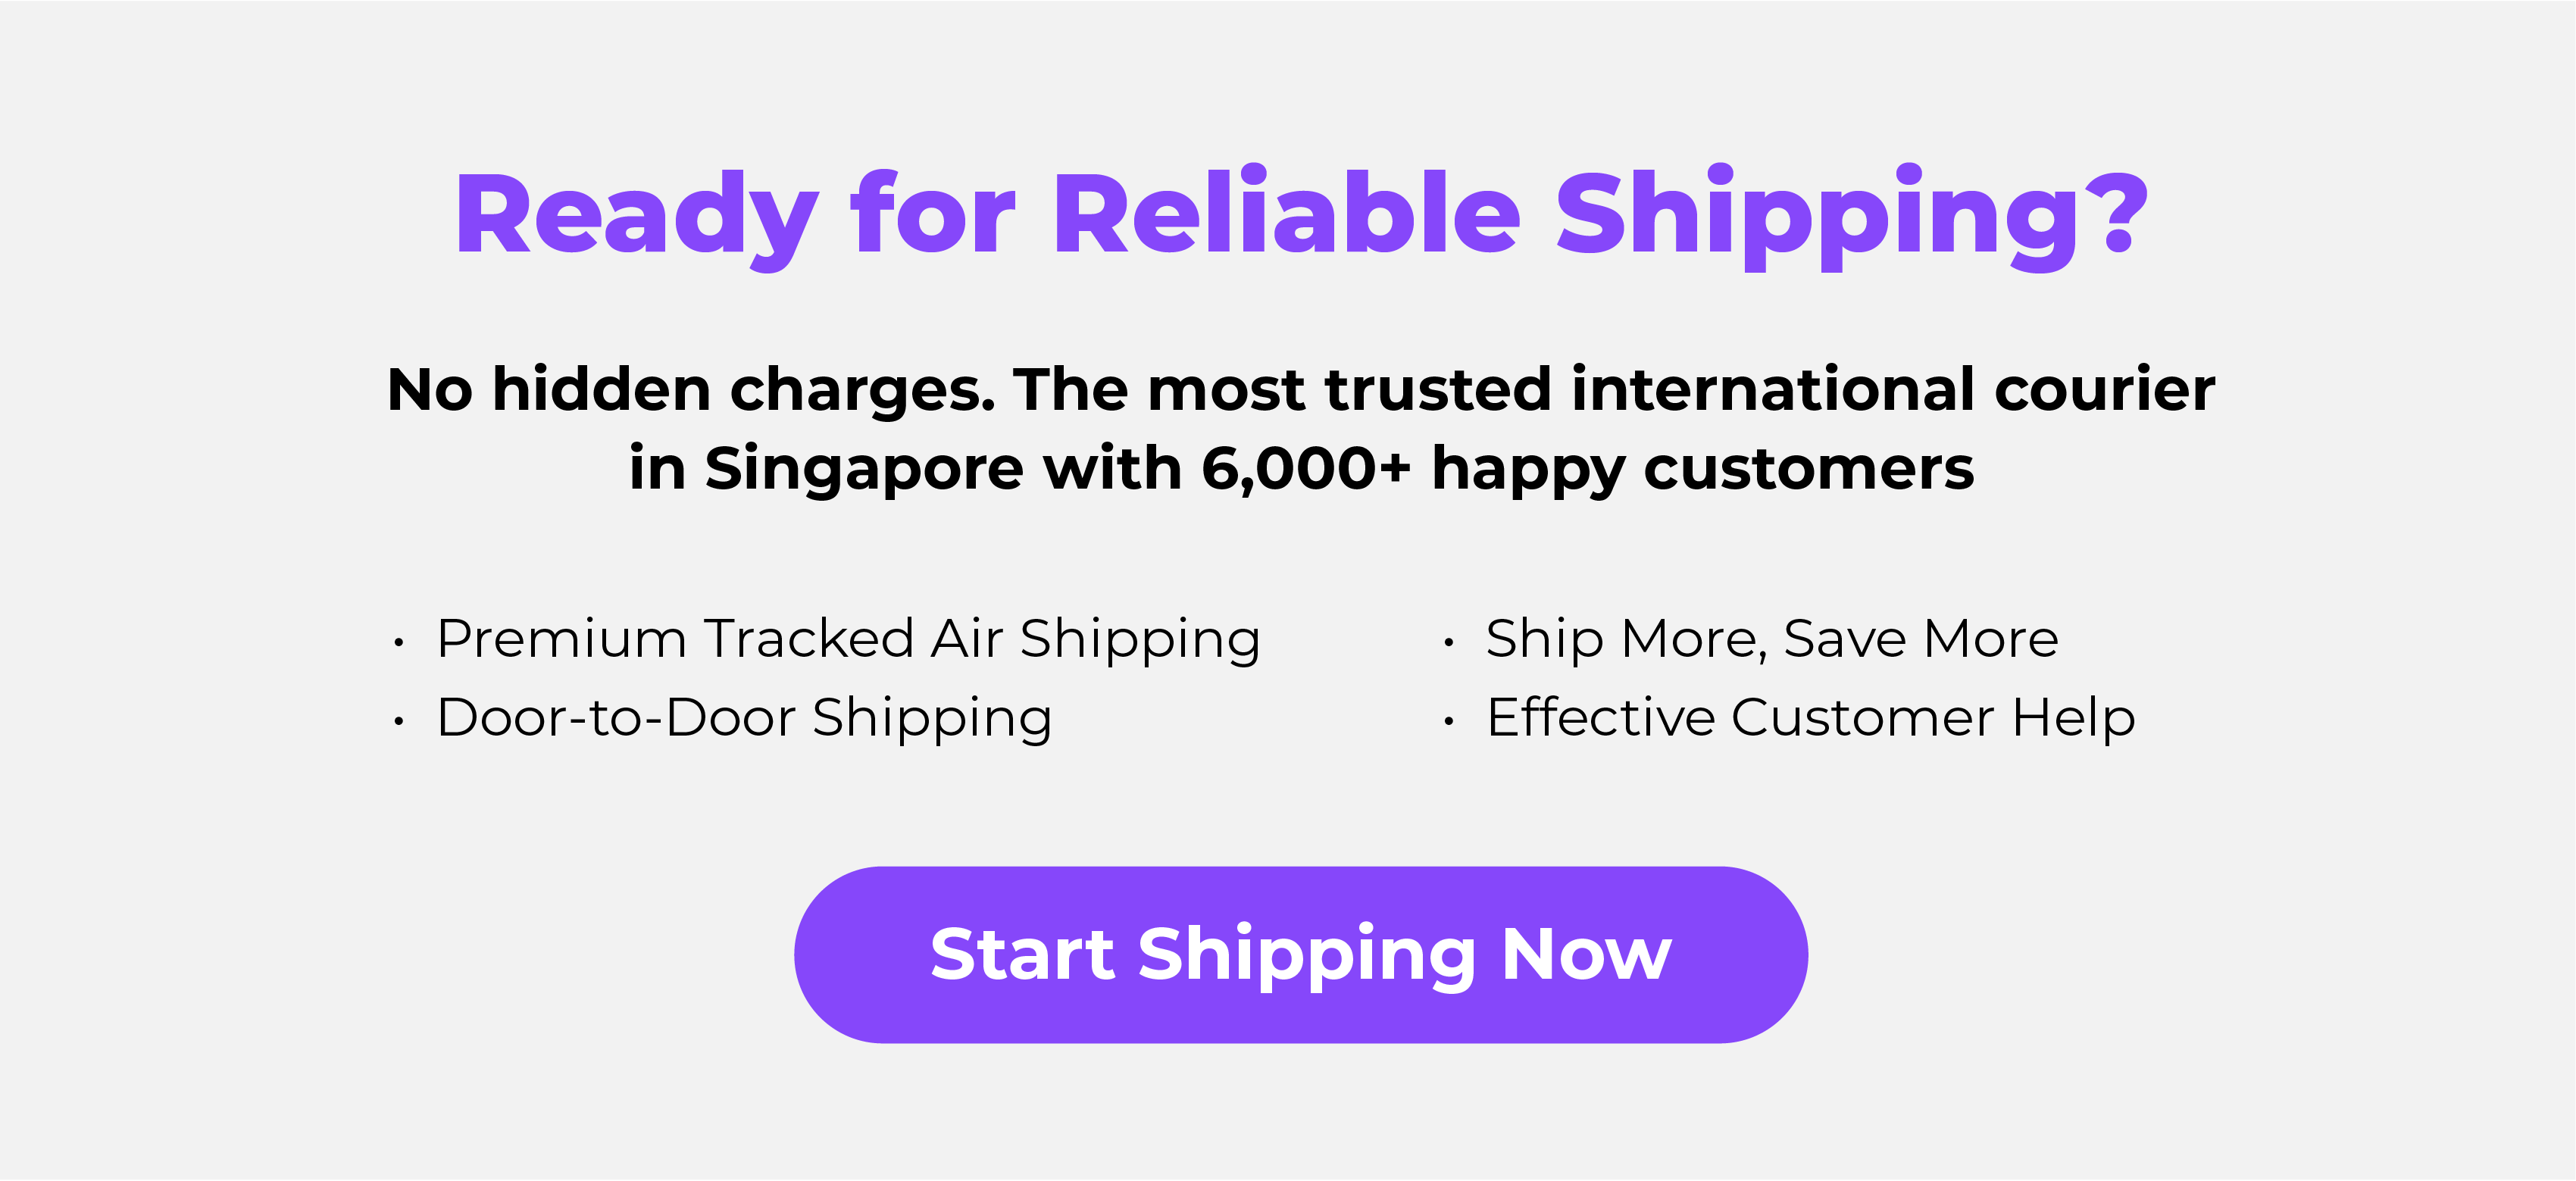 Ready for reliable shipping? Sign up now